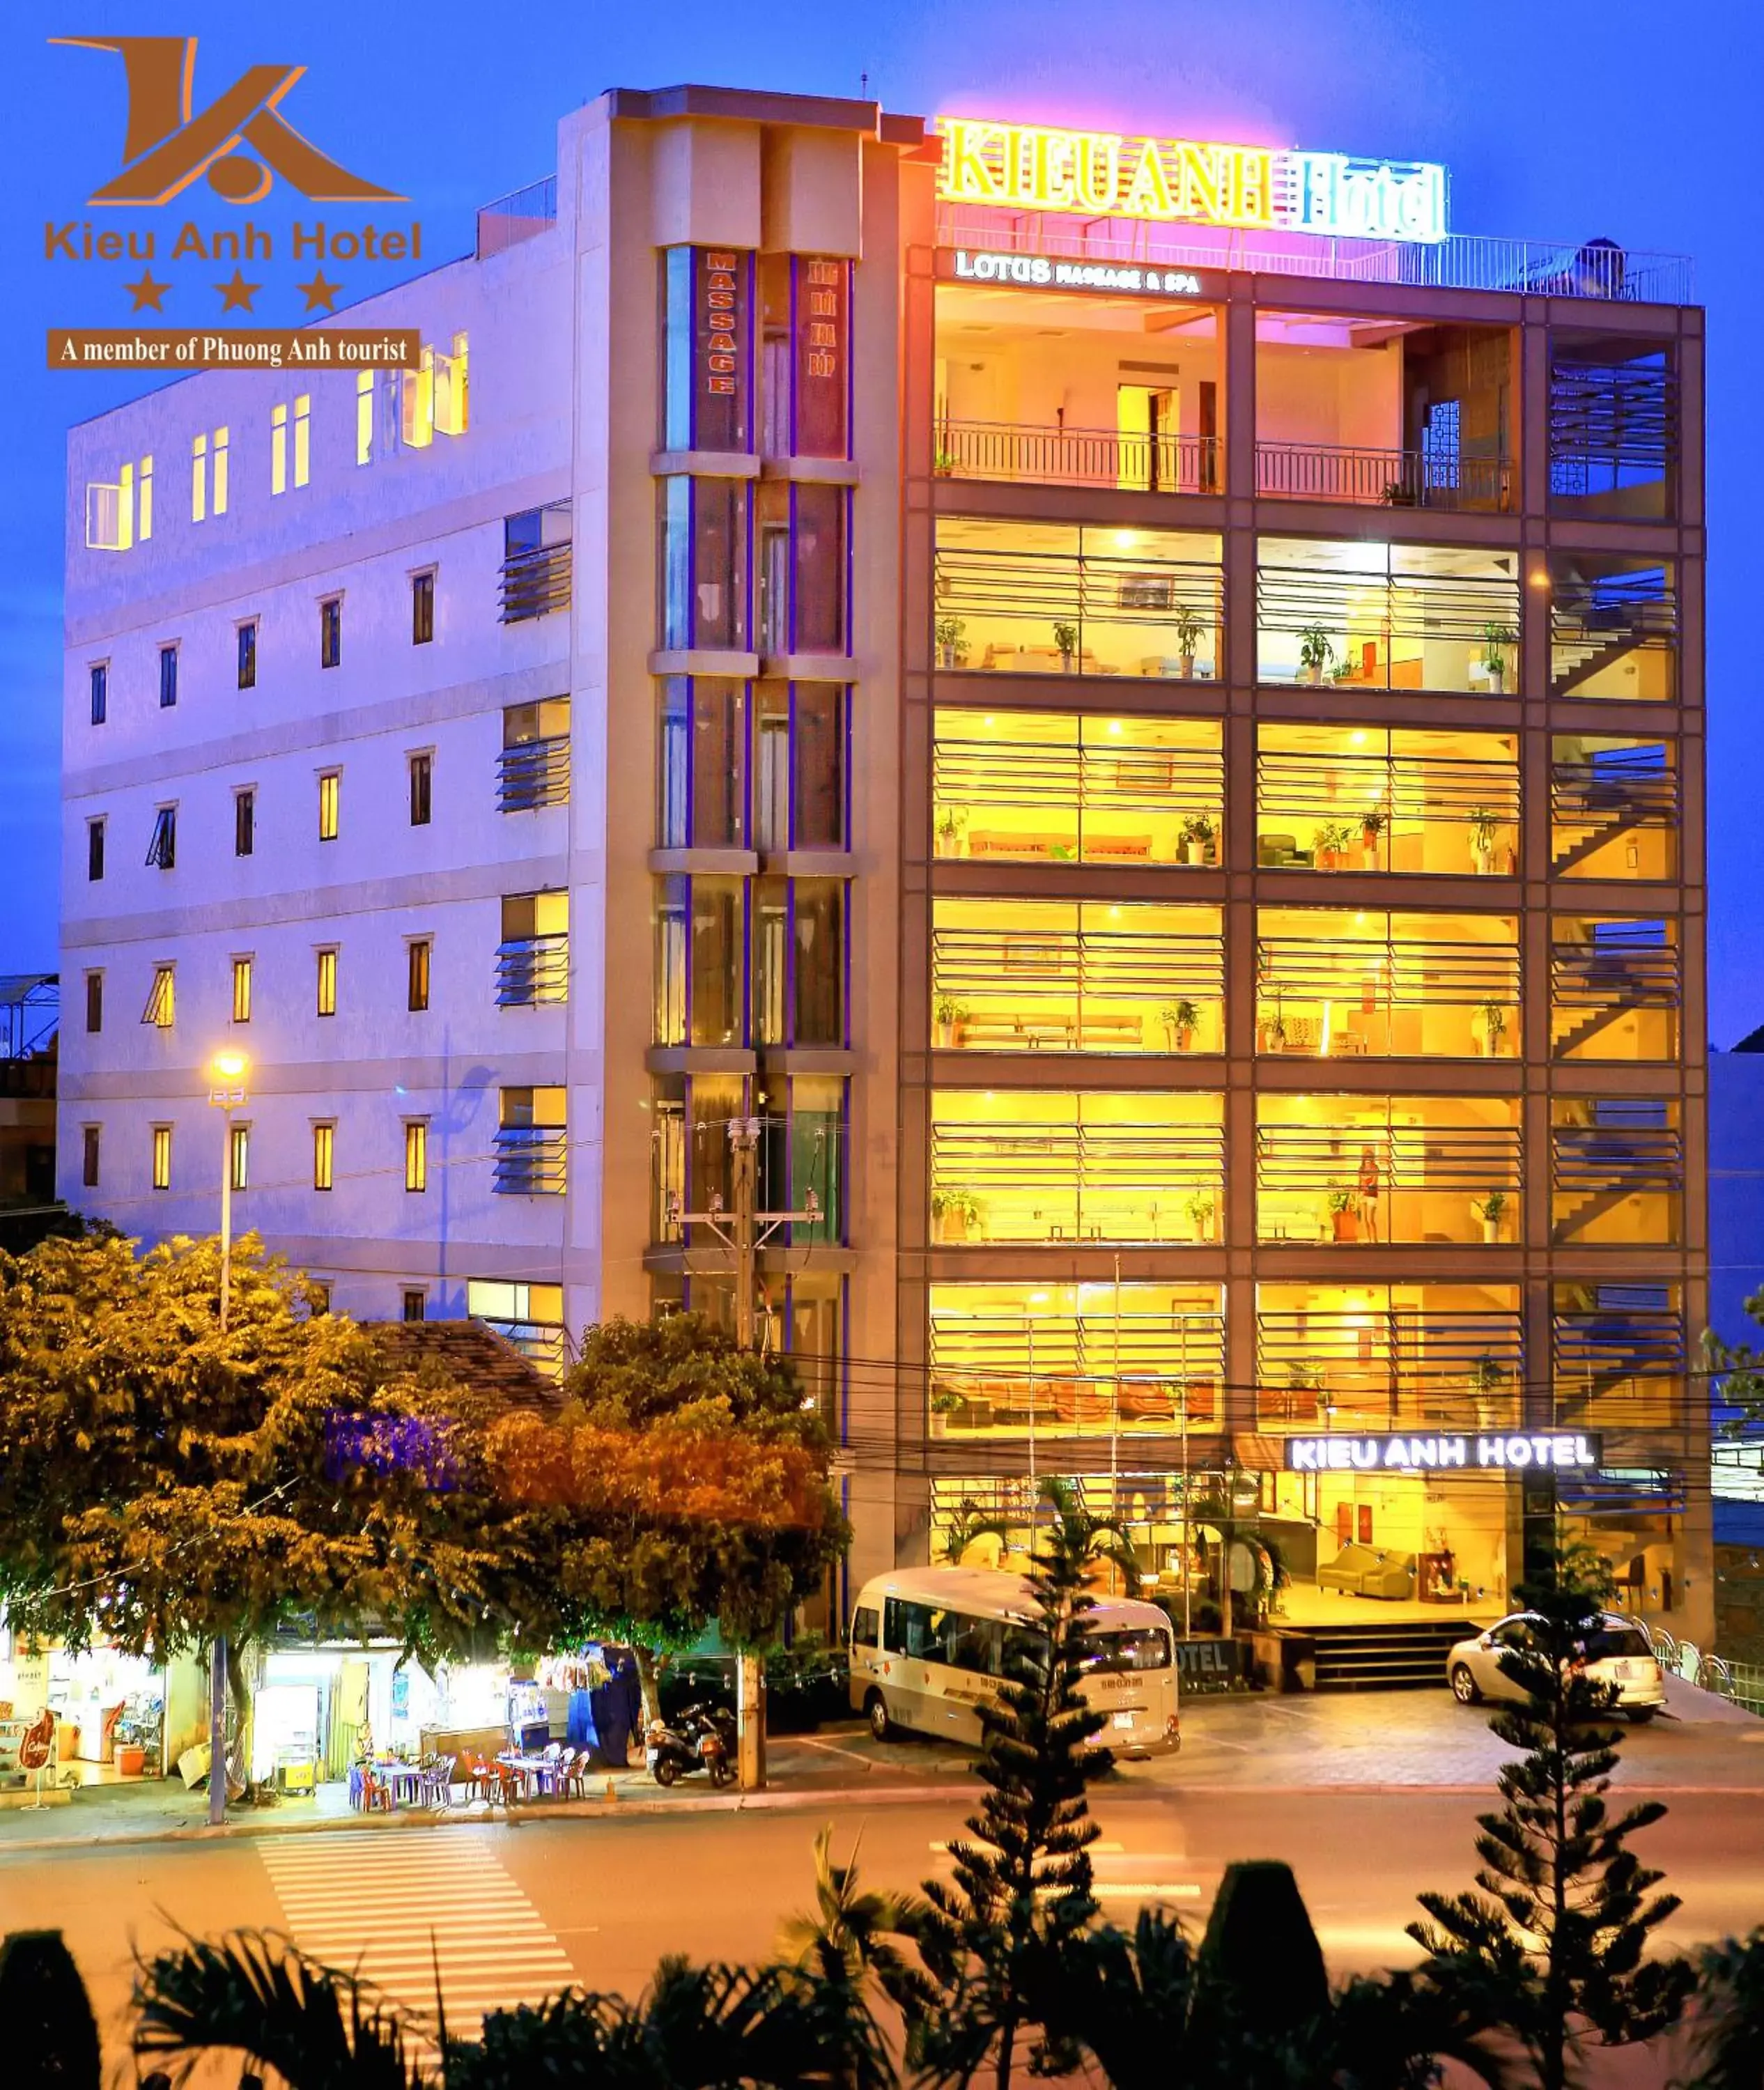 Property building in Kieu Anh Hotel